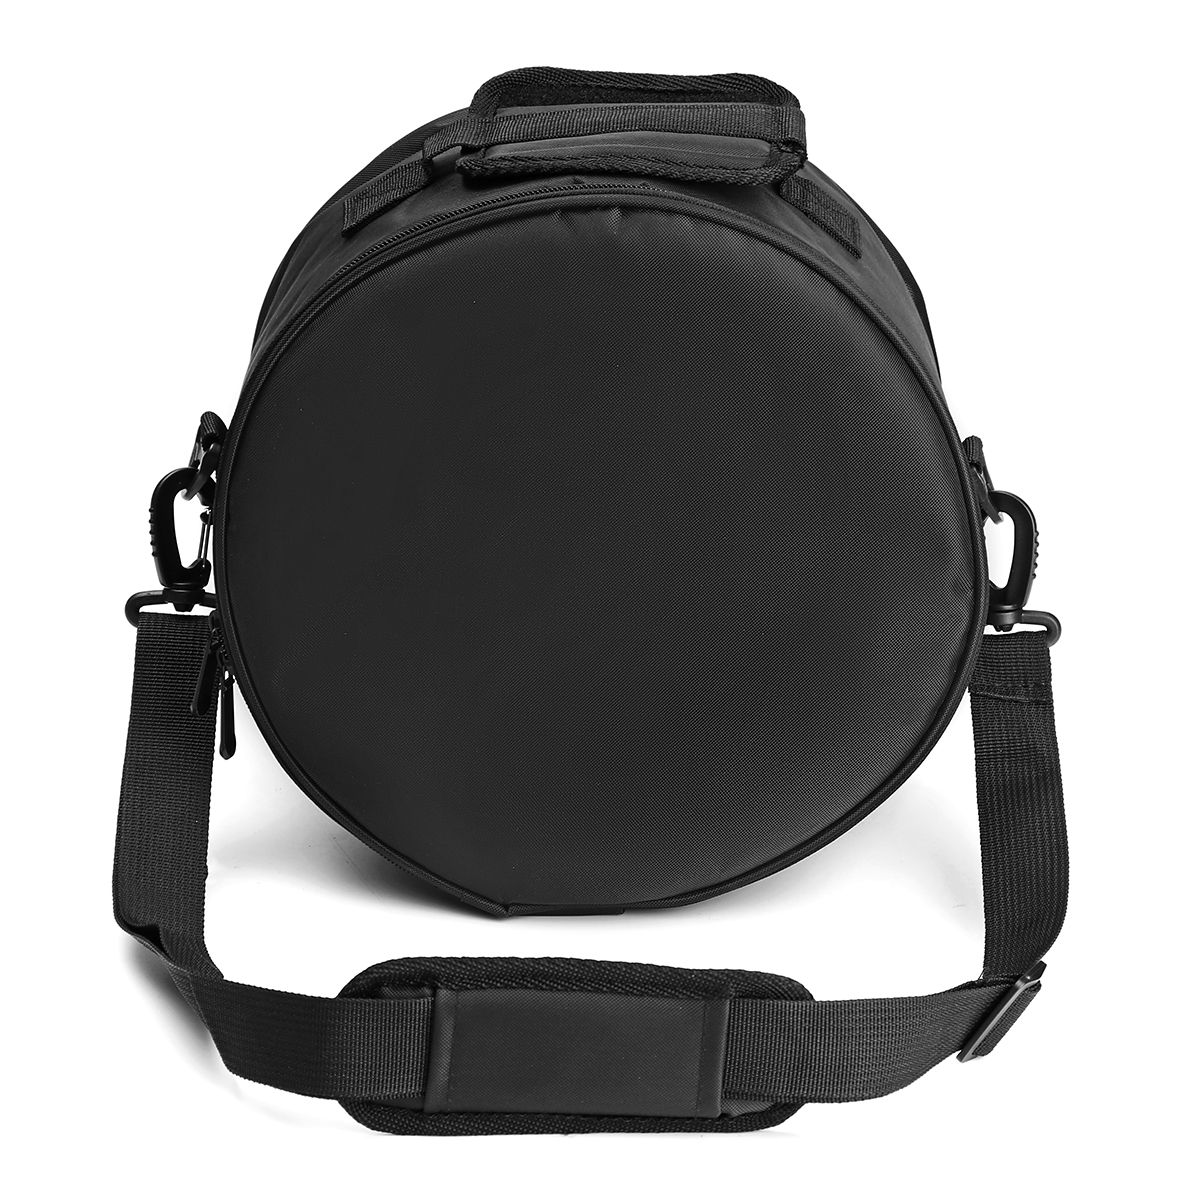 Steel-Tongue-Drum-Bag-Storage-Punch-Soulder-Crossbody-Bag-For-Outdoor-Camping-Leisure-Wear-1357124-7